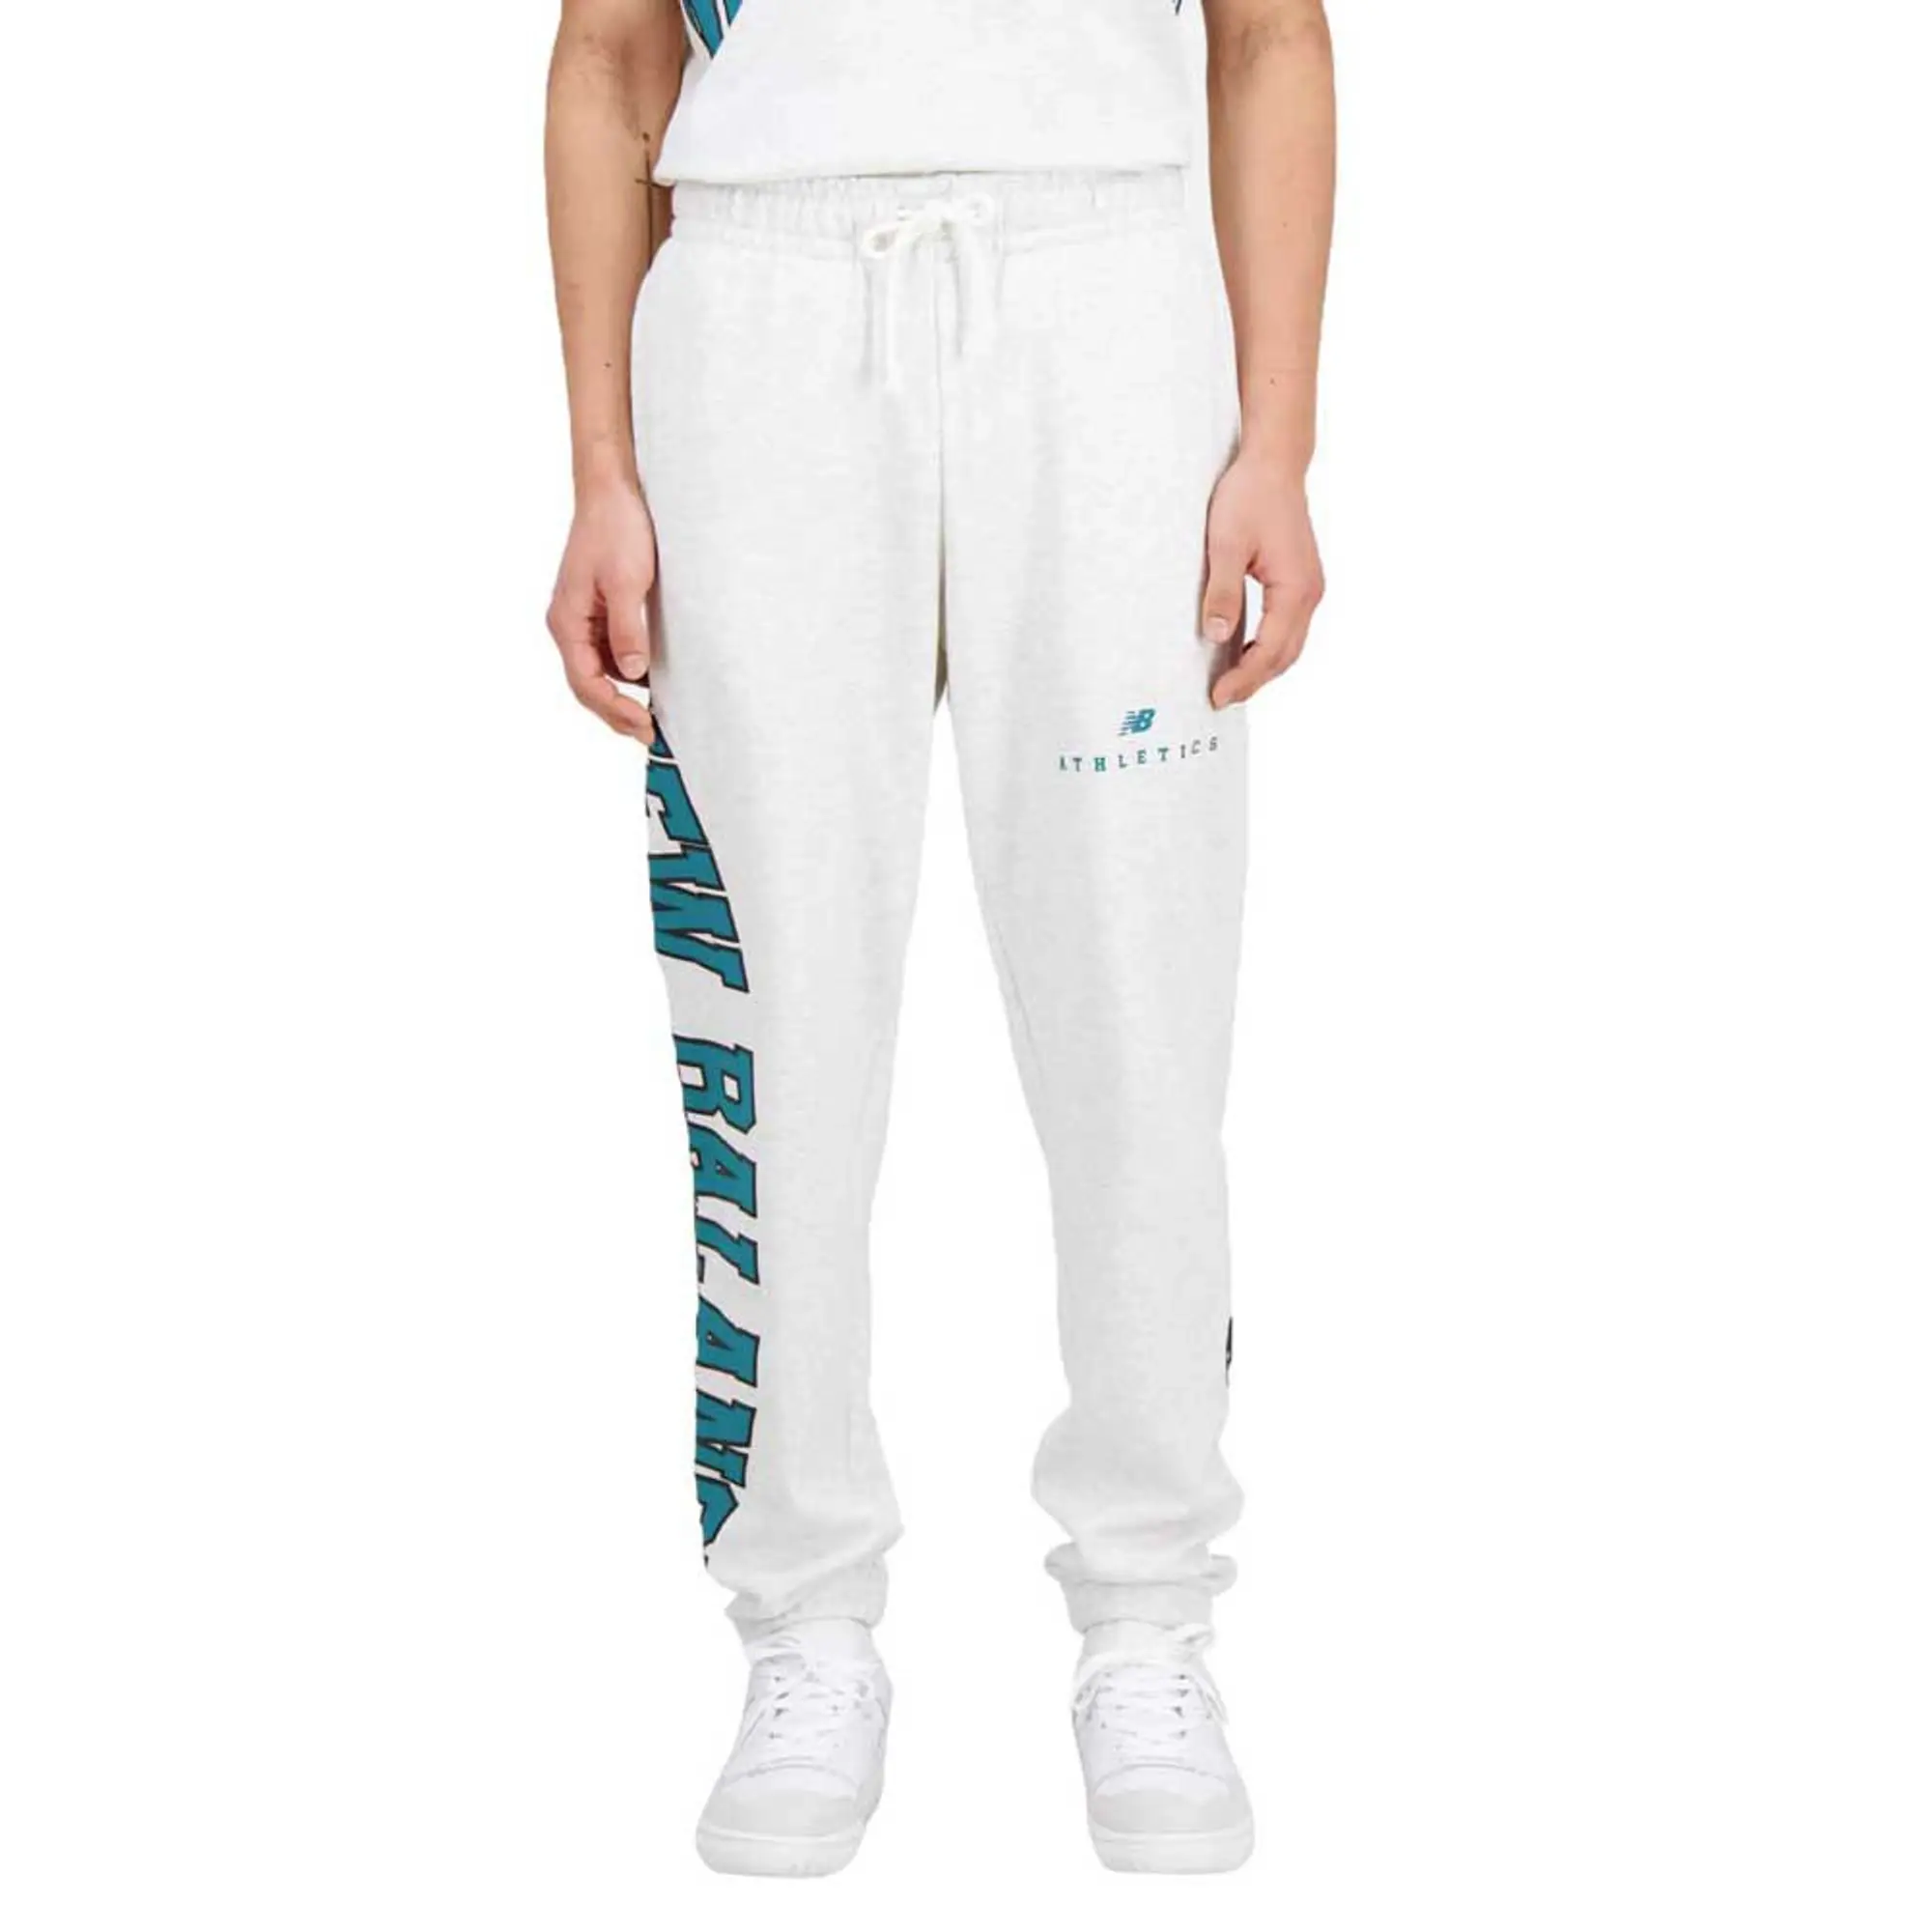 New Balance Unisex Uni-ssentials Warped Classics French Terry Sweatpant in White Cotton